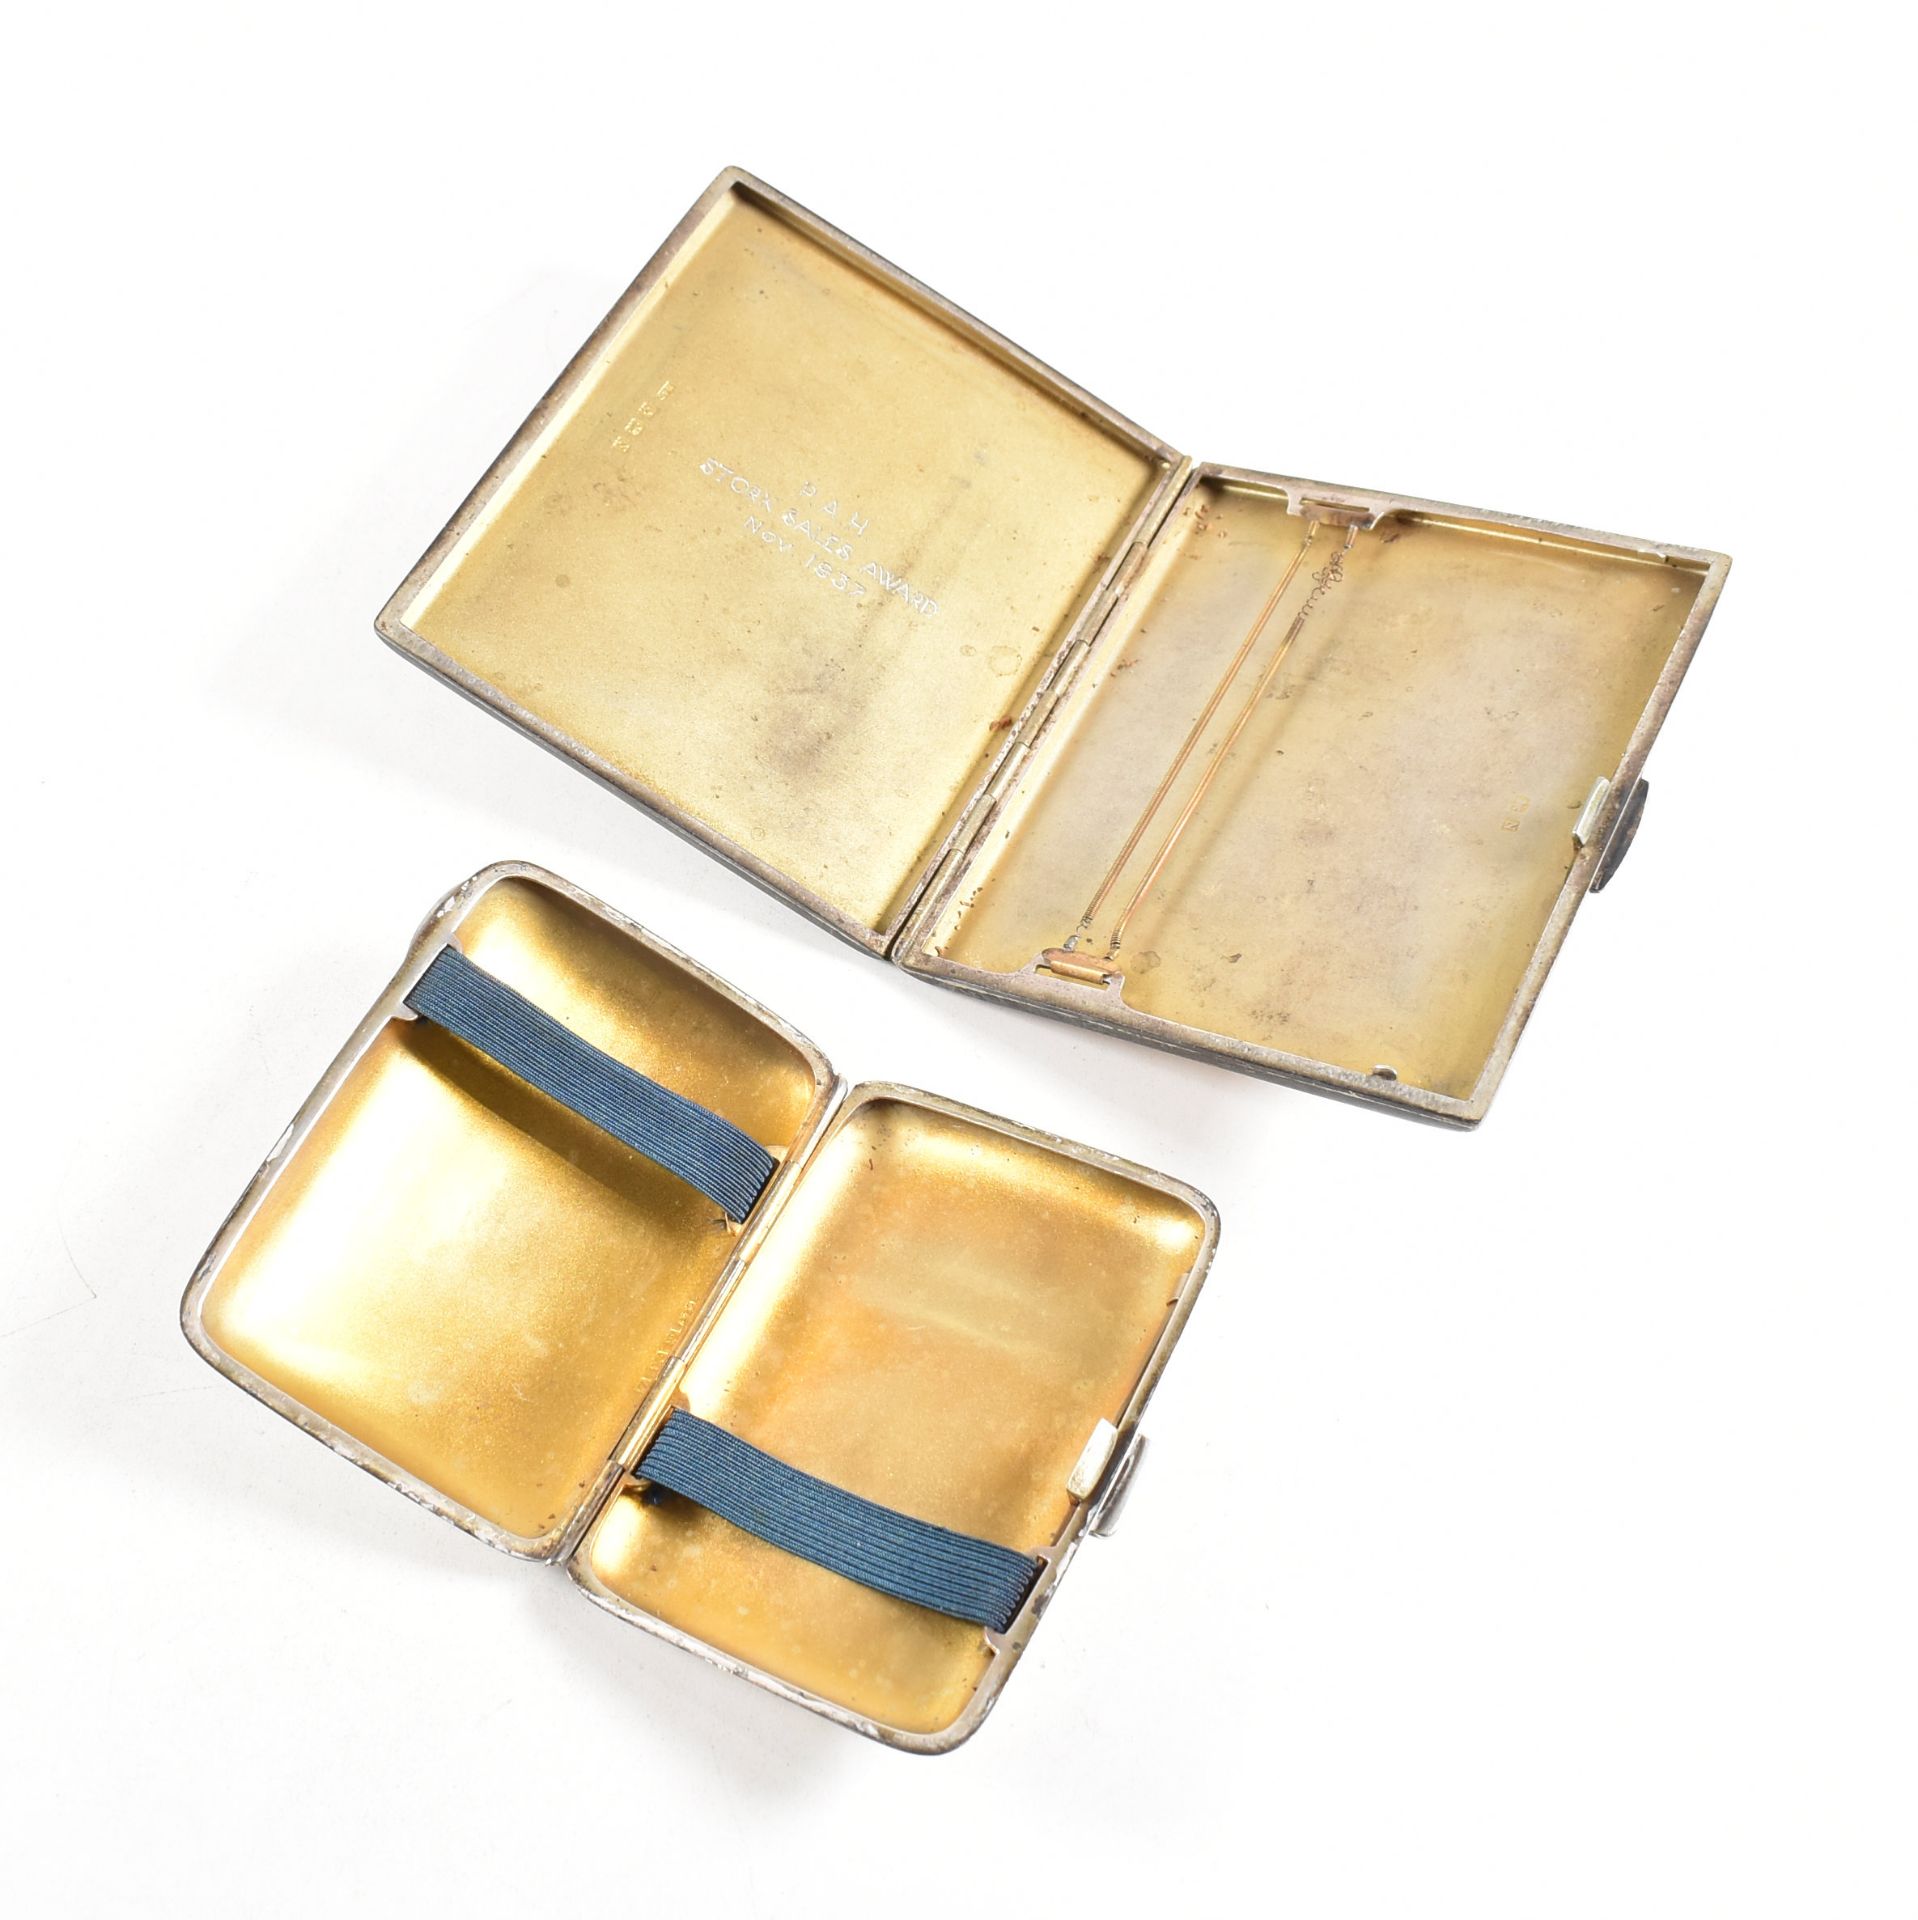 TWO EARLY 20TH CENTURY HALLMARKED SILVER CIGARETTE CASES - Image 5 of 8